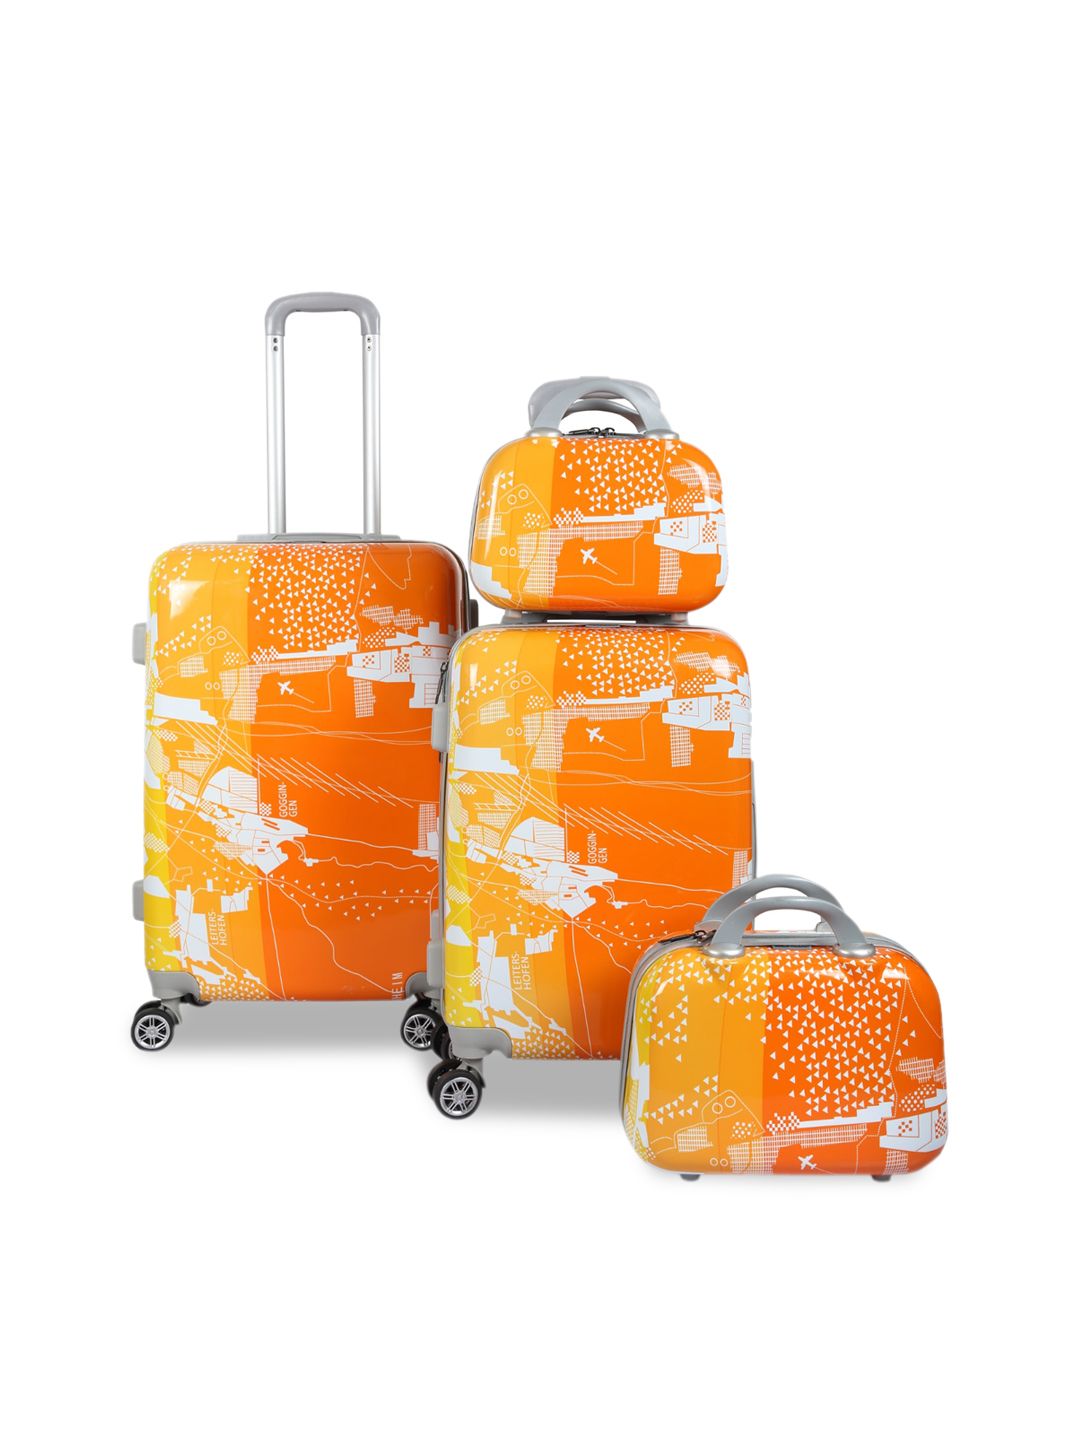 Polo Class Orange 2Pc Set Hard Luggage Trolley Bag (20/24 inch) with 2 pc Vanity Price in India